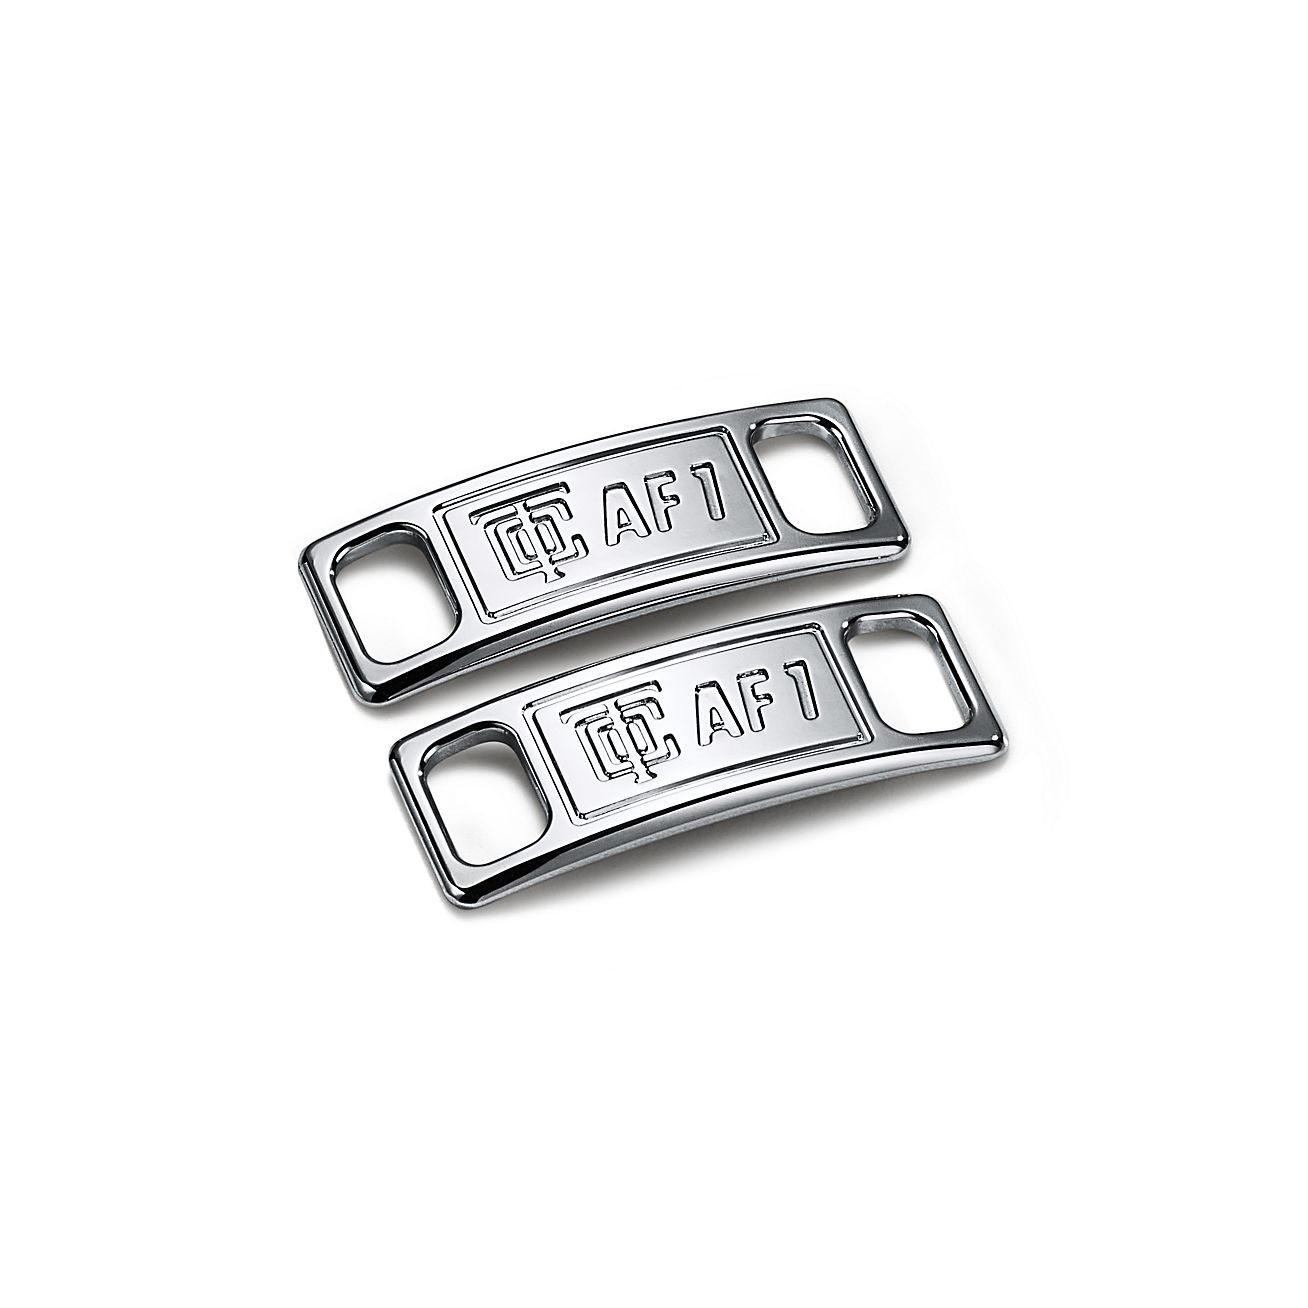 Nike/Tiffany Air Force 1 Sterling Silver, Set of Two | Tiffany Co.